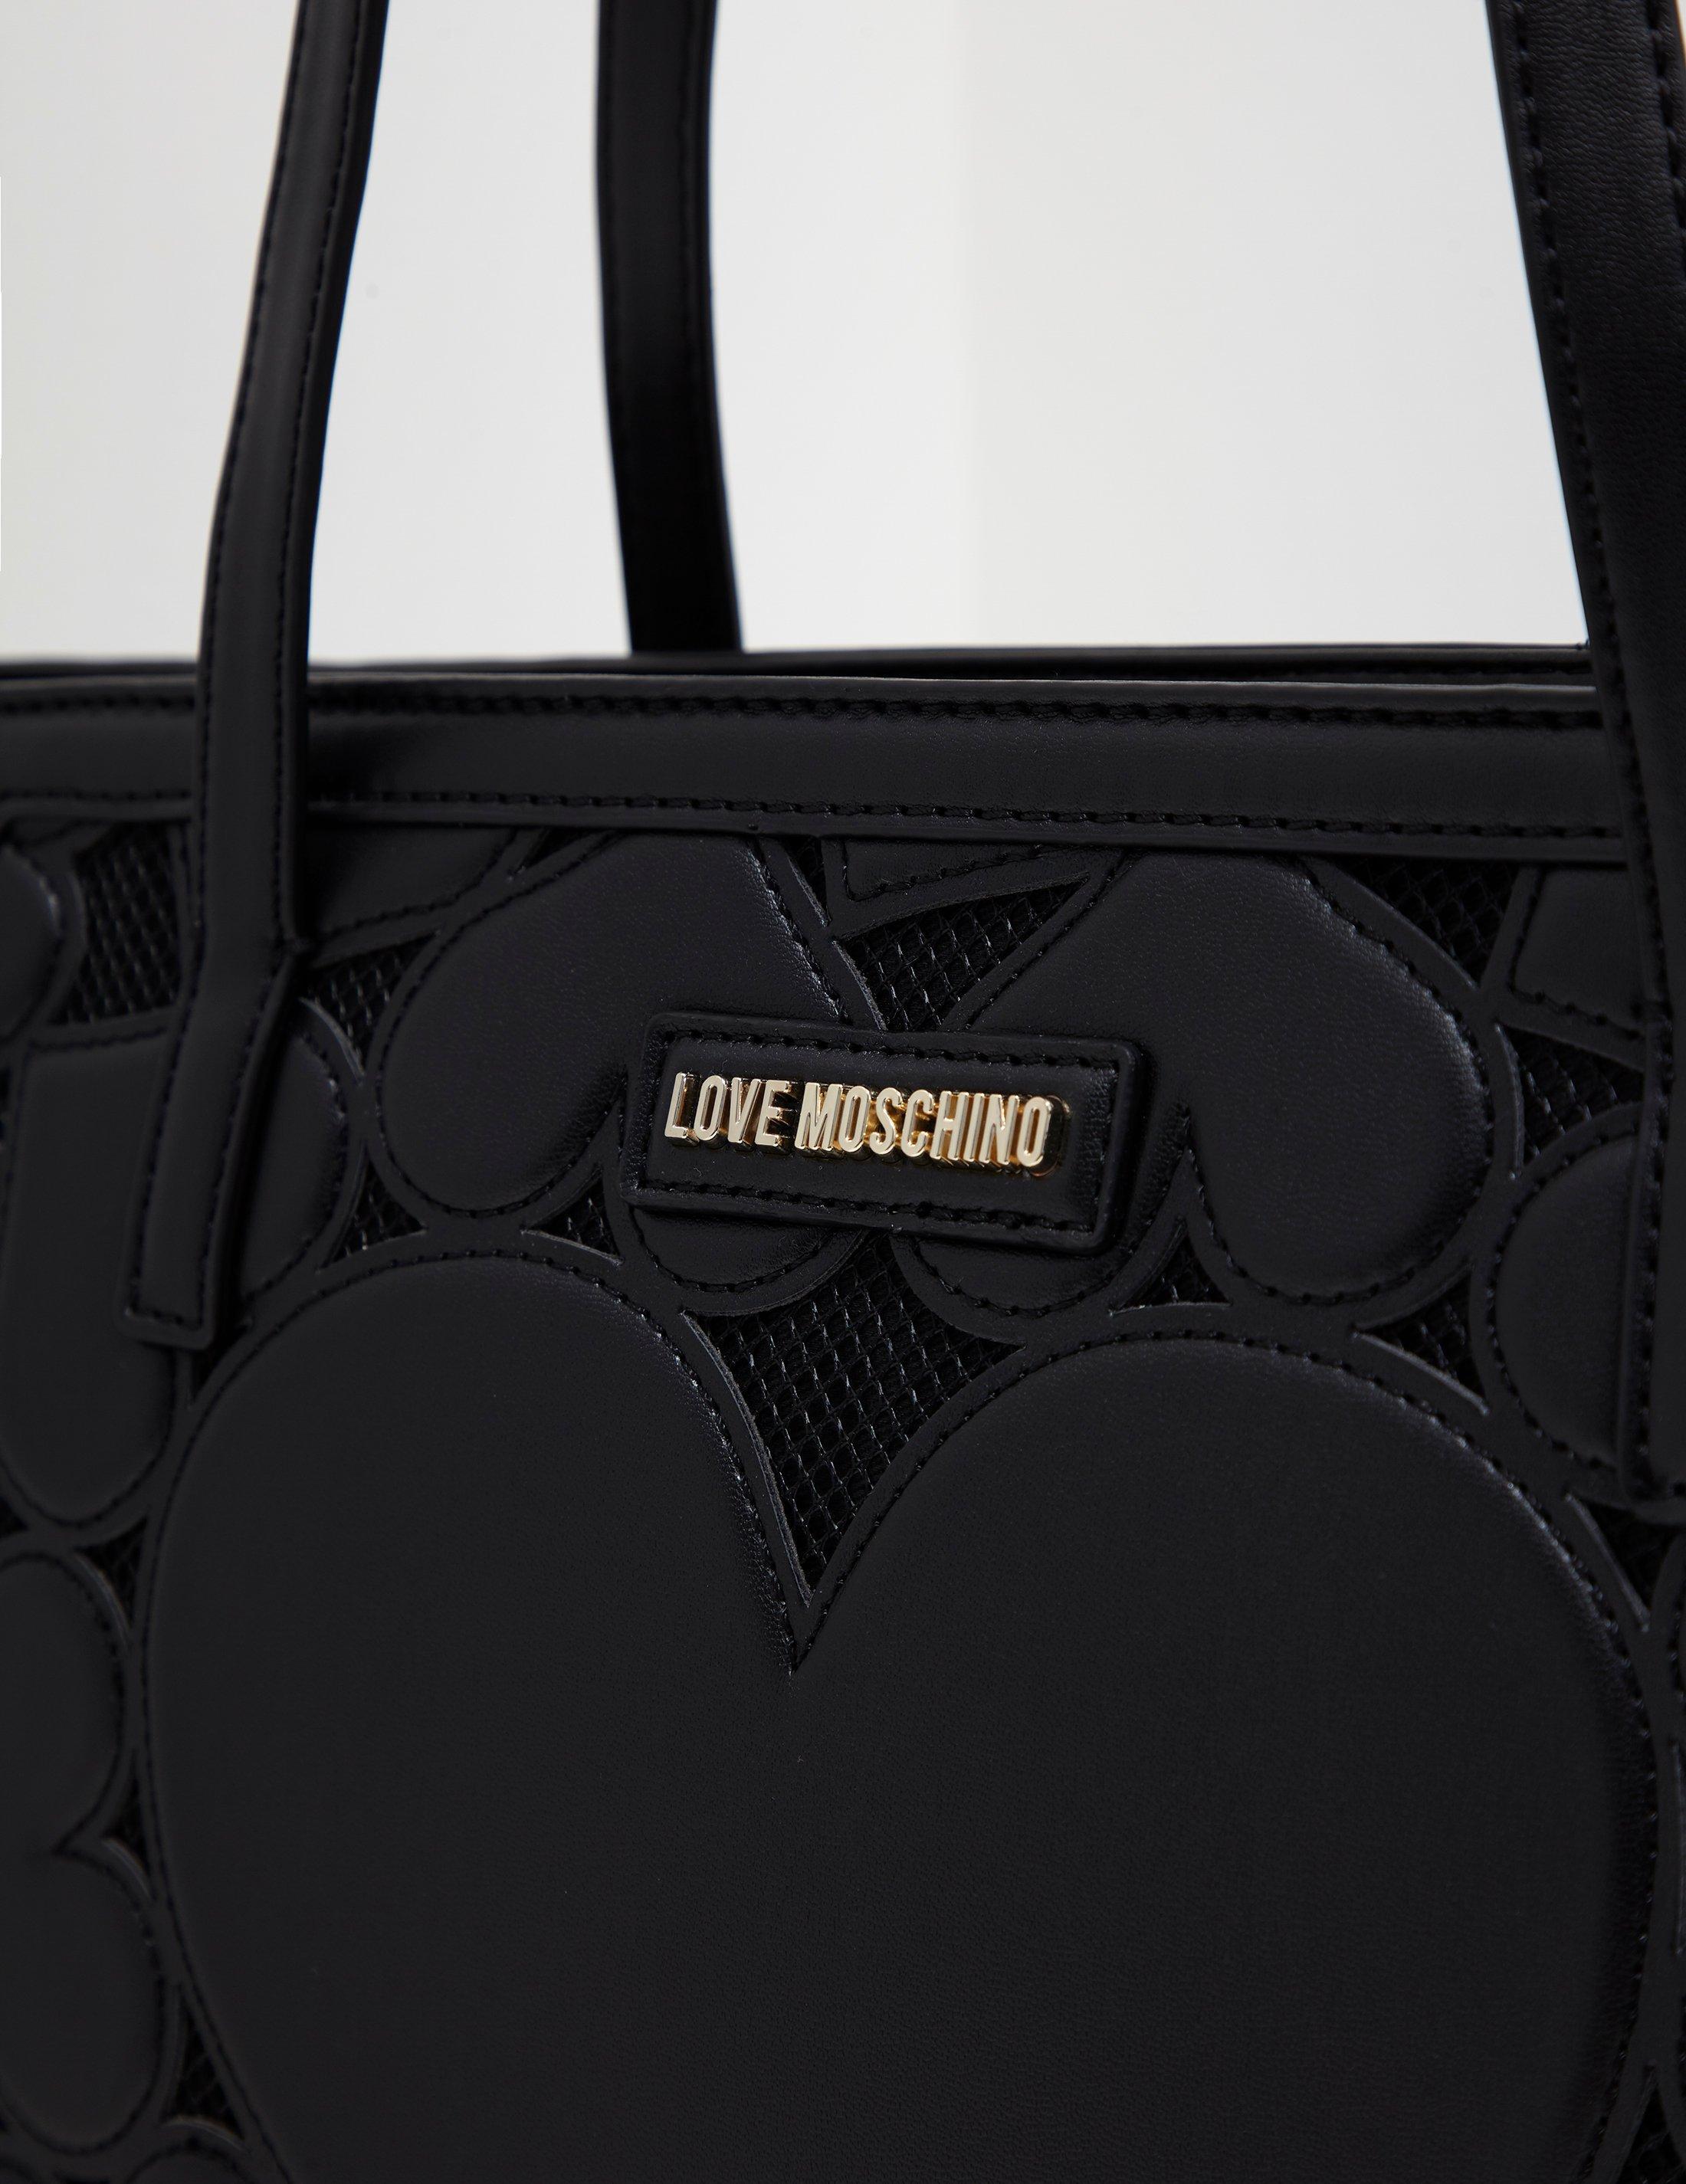 Love Moschino Heart Quilted Shopper Bag Black in Black - Lyst